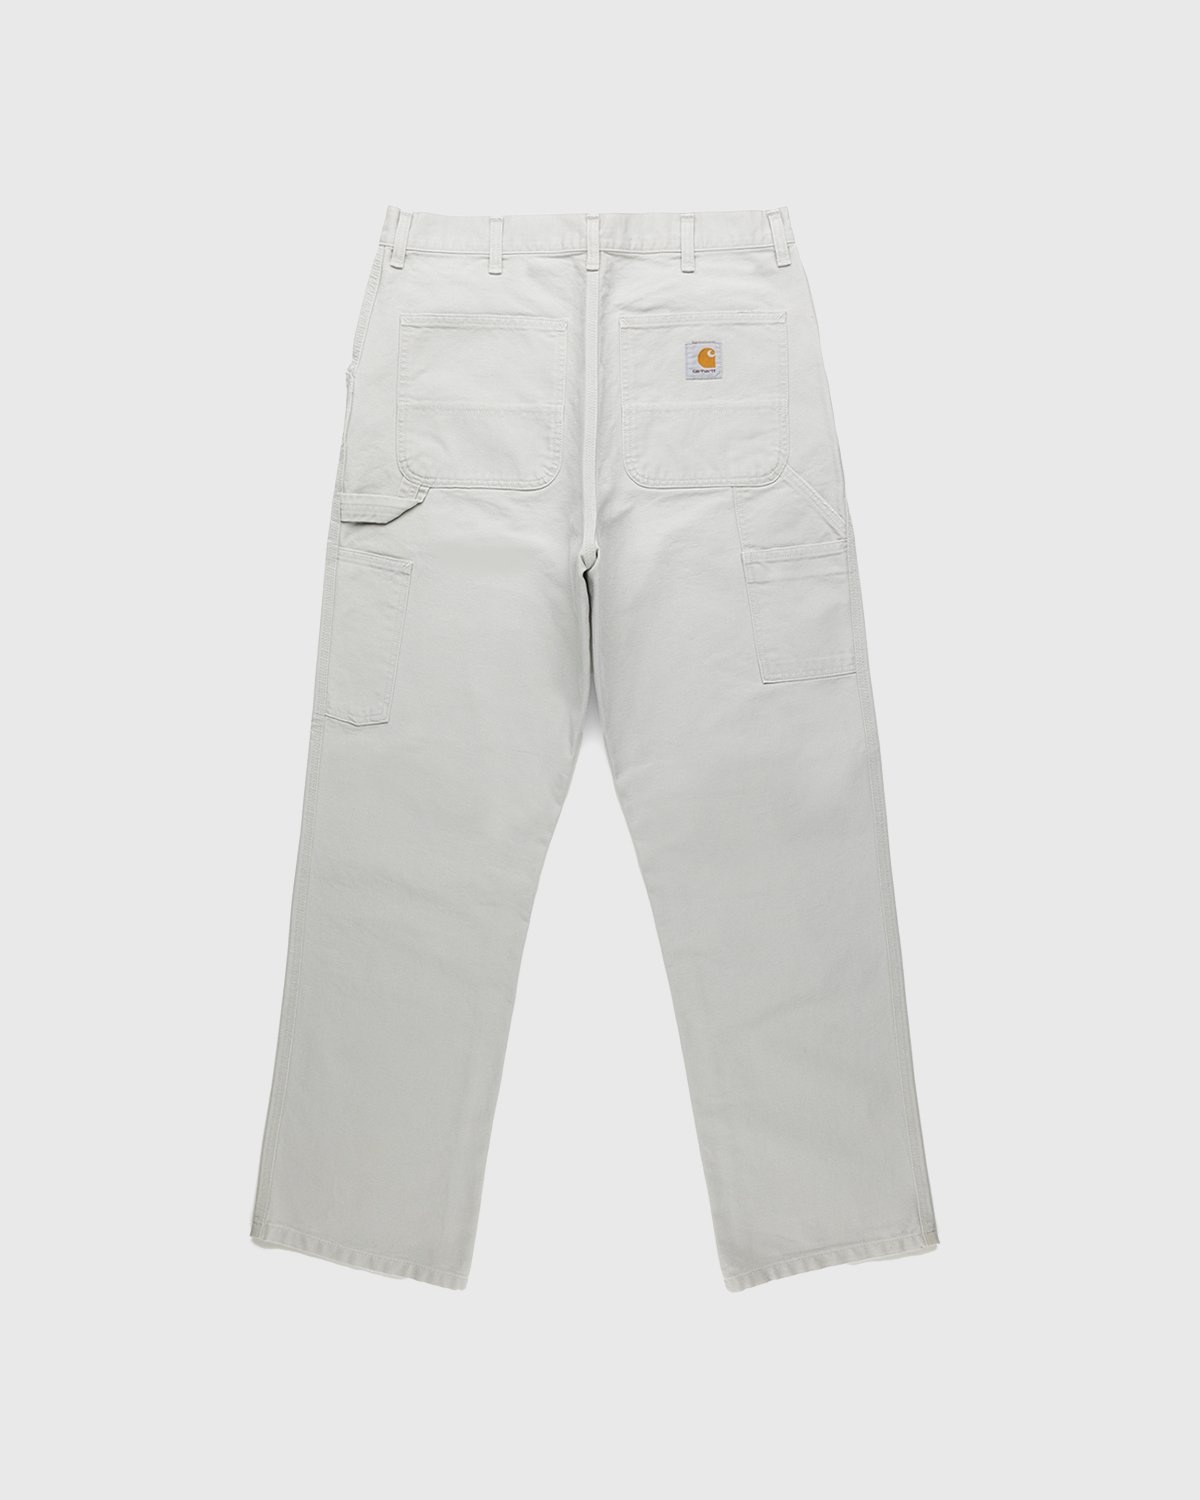 Carhartt WIP – Single Knee Pant Aged Canvas Grey - Trousers - Grey - Image 2